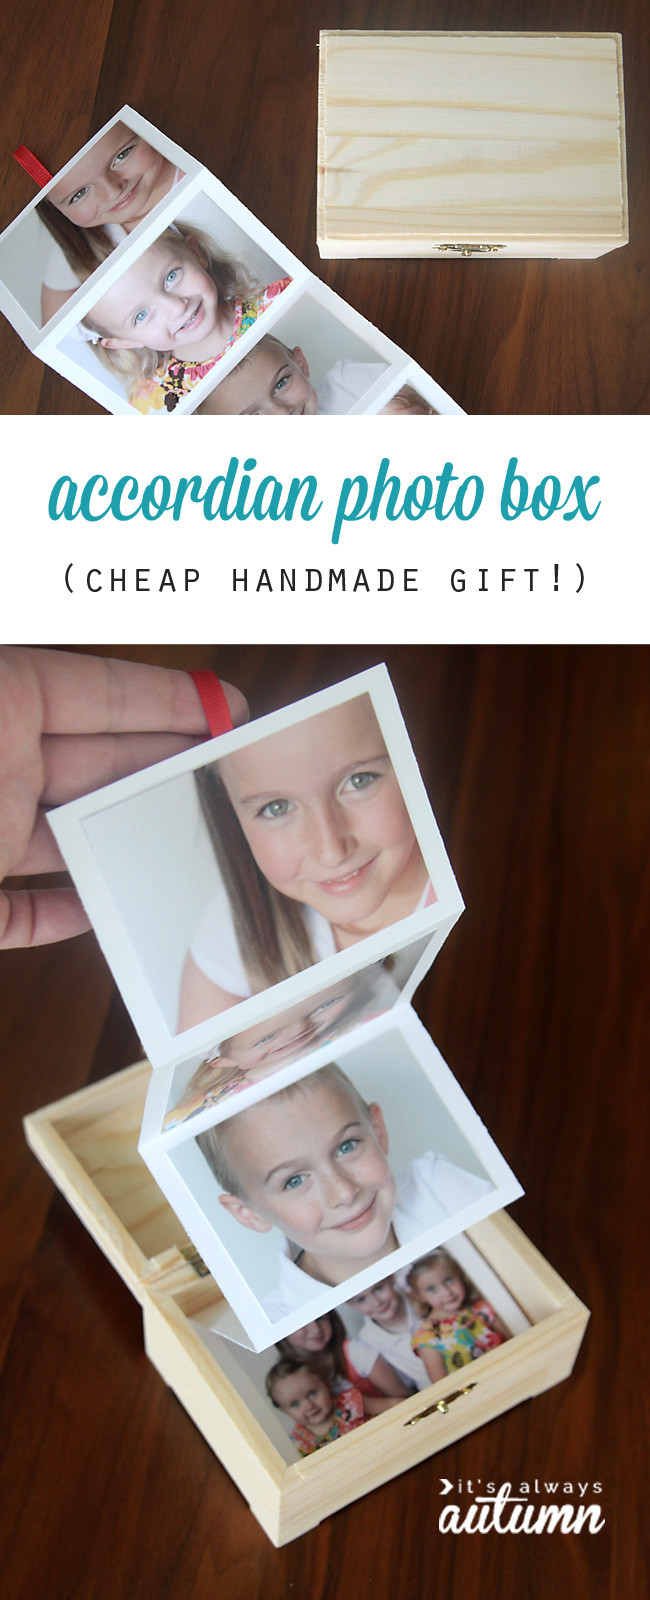 DIY Photography Gifts
 easy & cheap DIY t idea photo t box It s Always